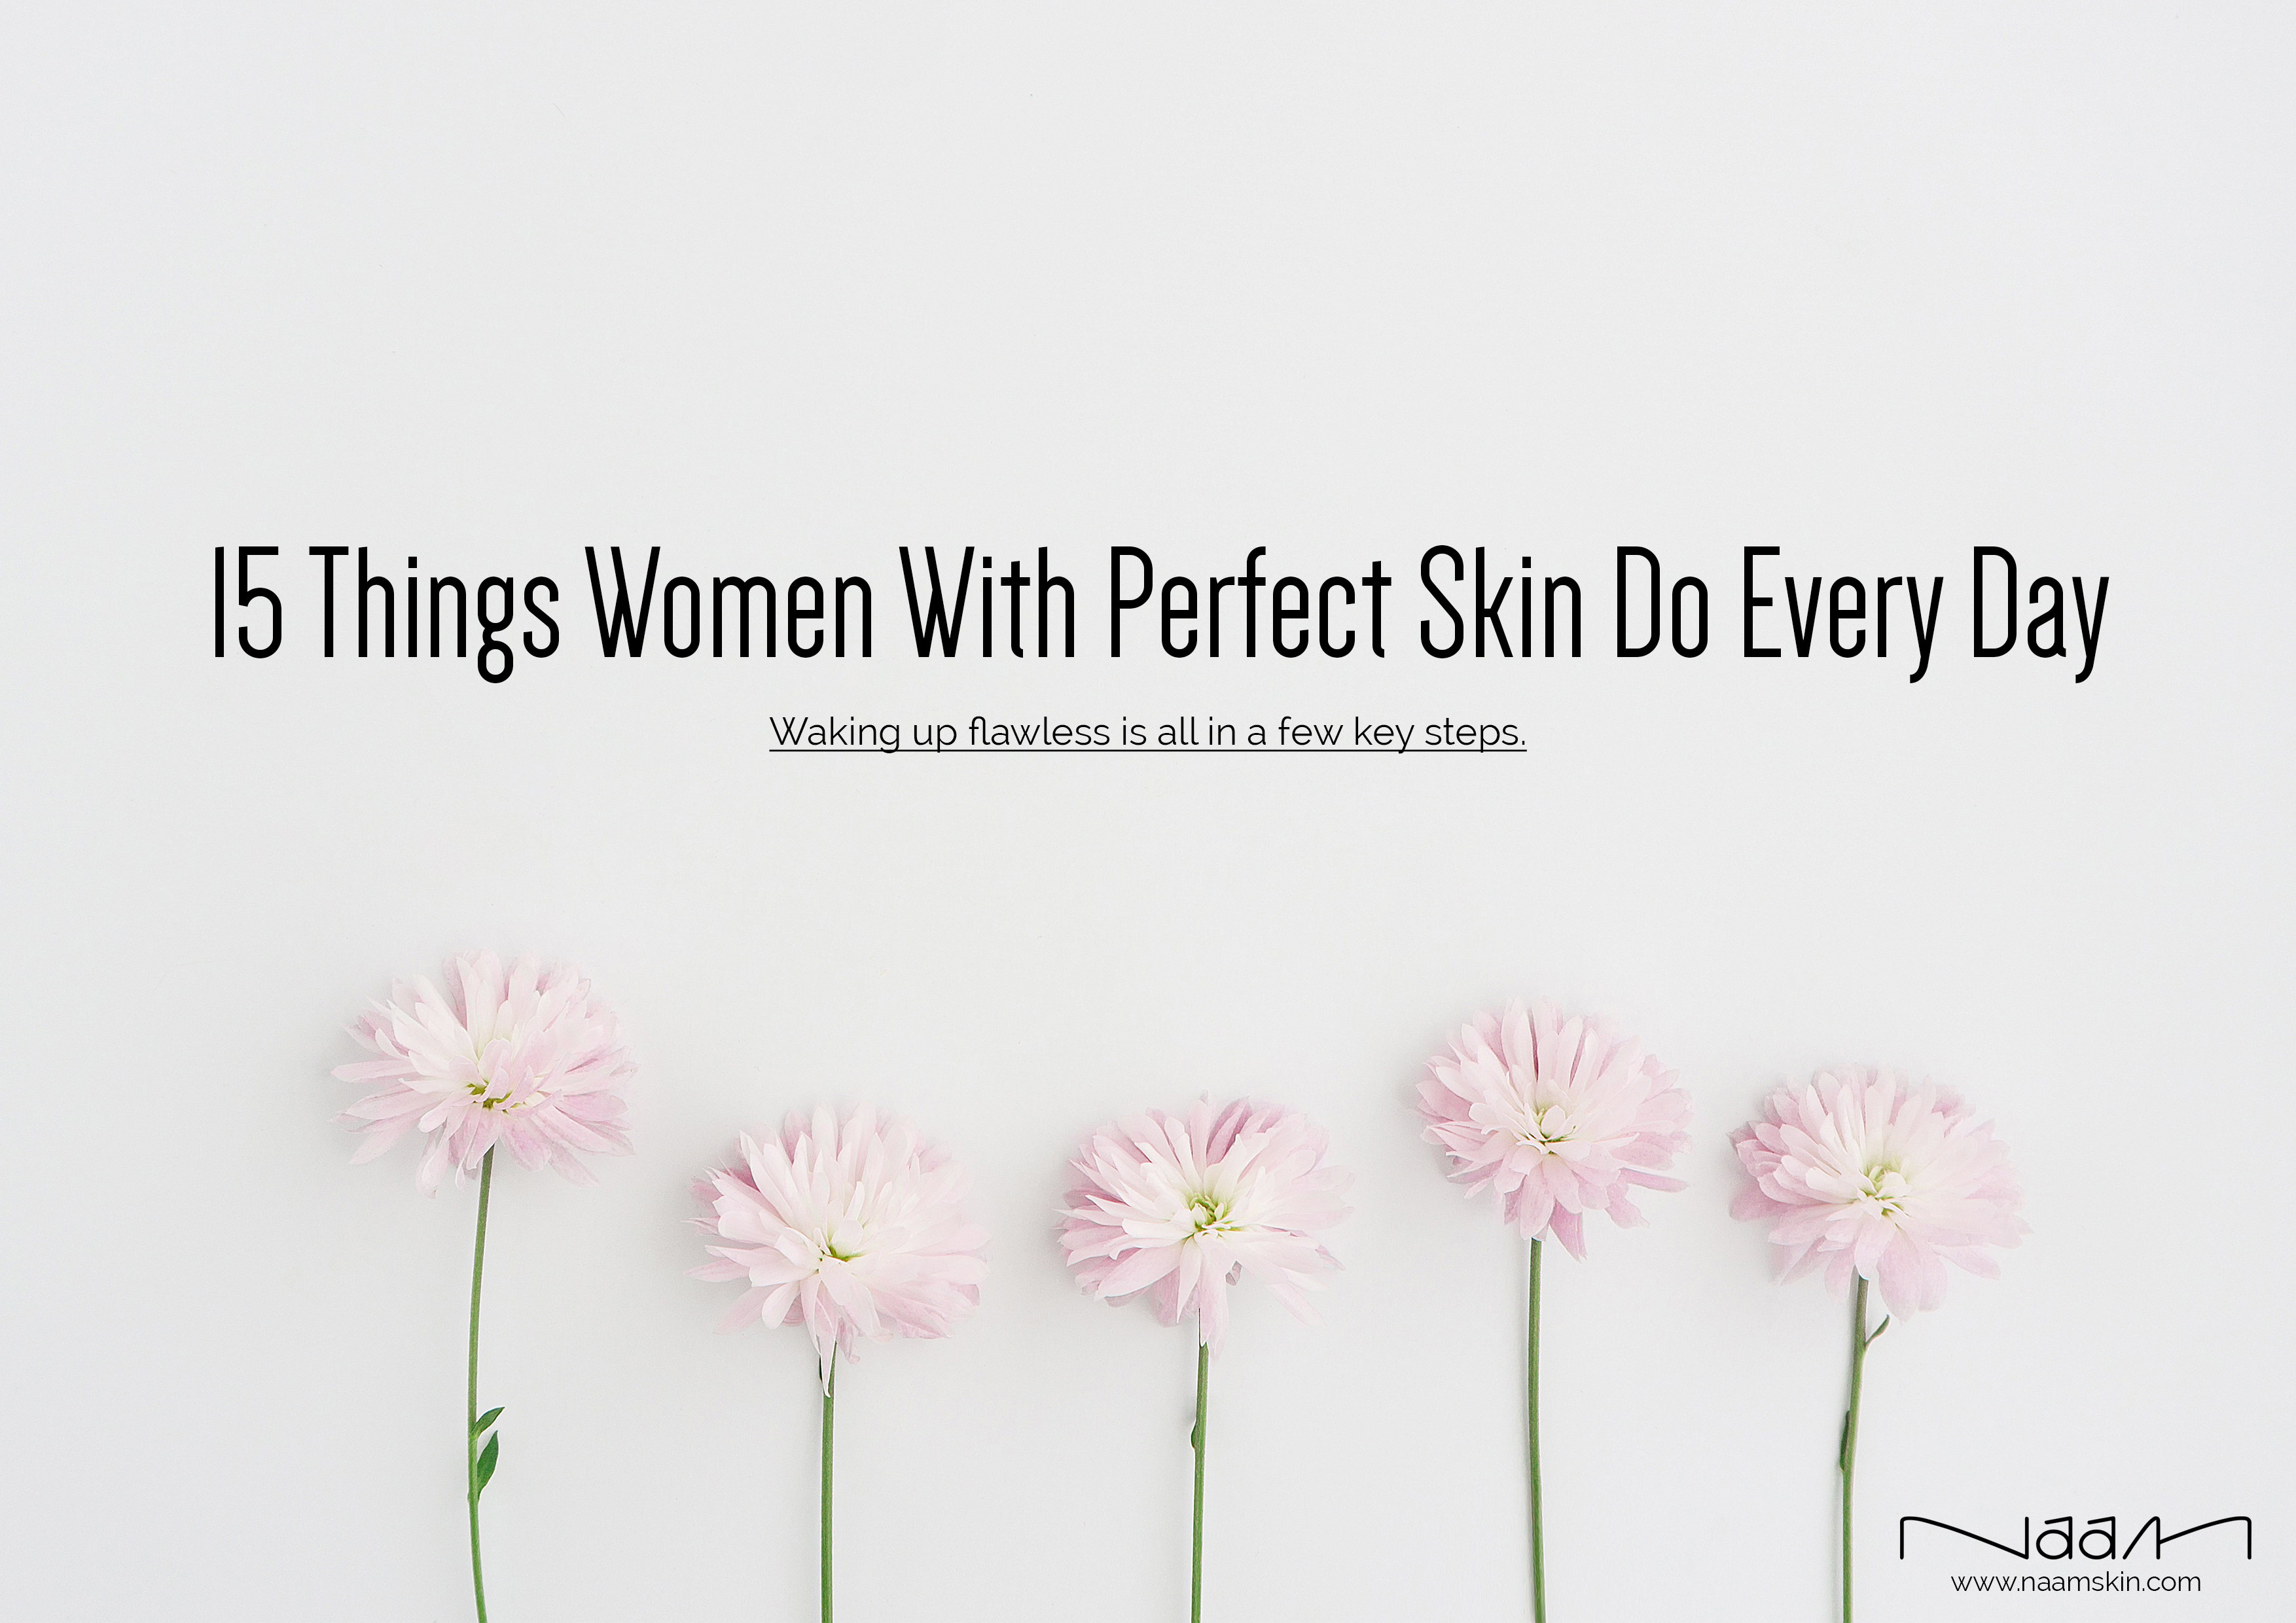 15 Things Women With Perfect Skin Do Every Day